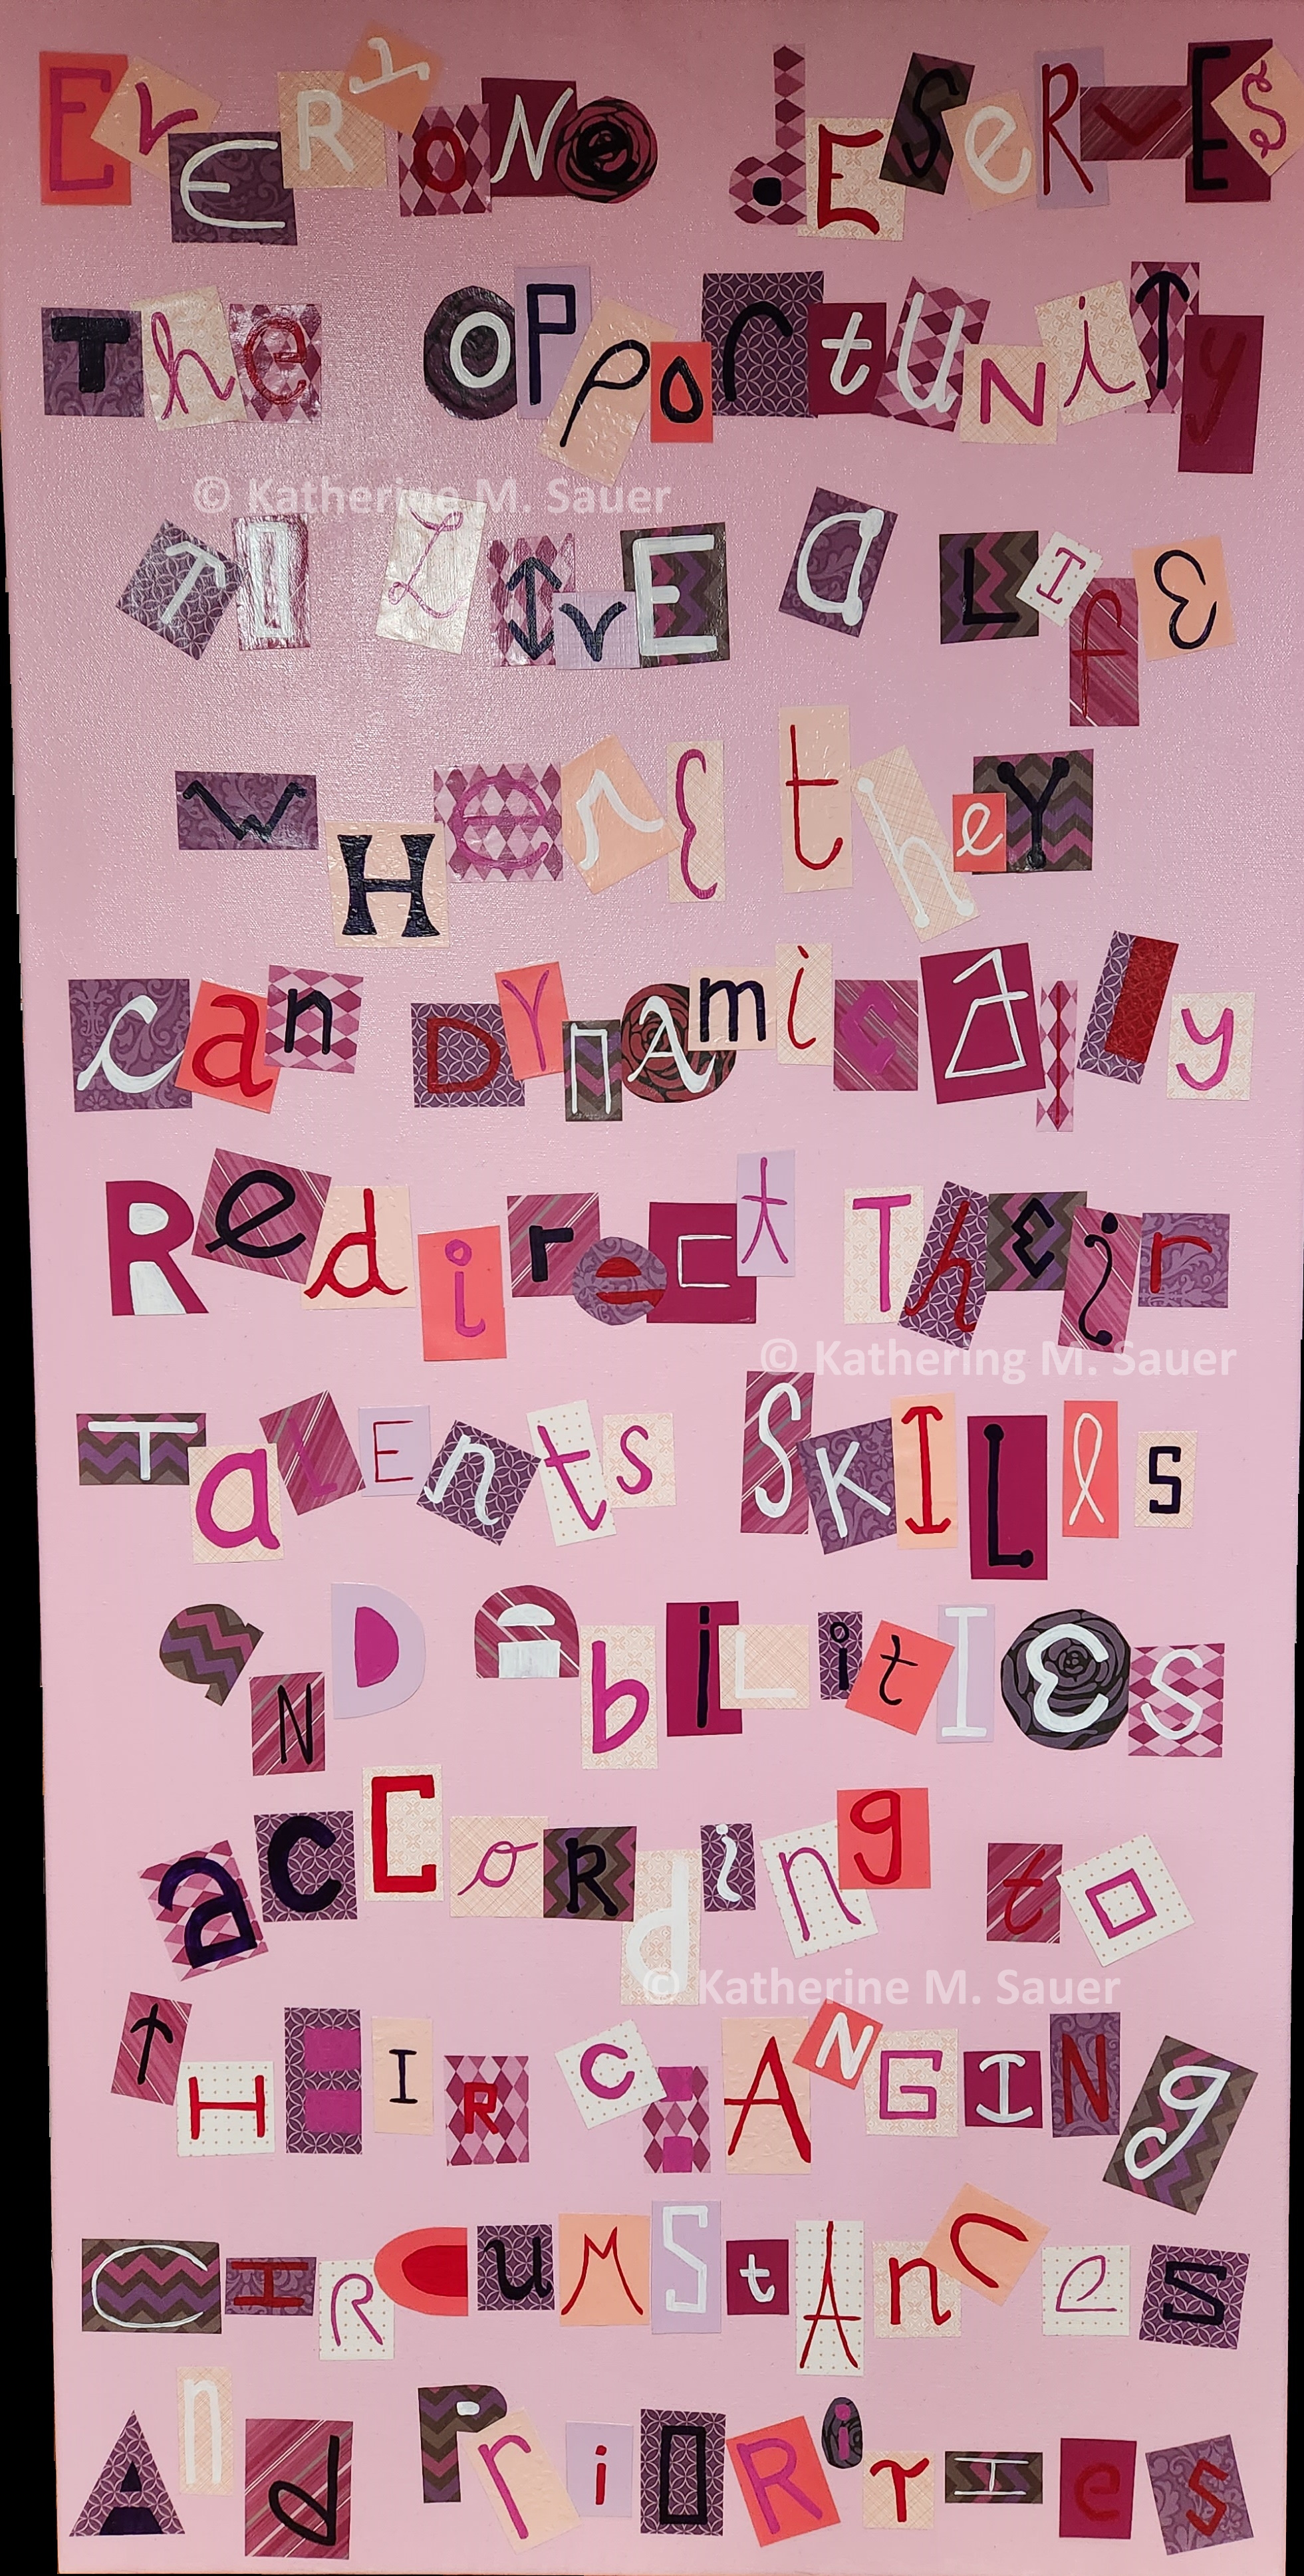 Ransom note style lettering that reads 'Everyone deserves the opportunity to live a life where they can dynamically redirect their talents, skills, and abilities according to their changing circumstances and priorities'